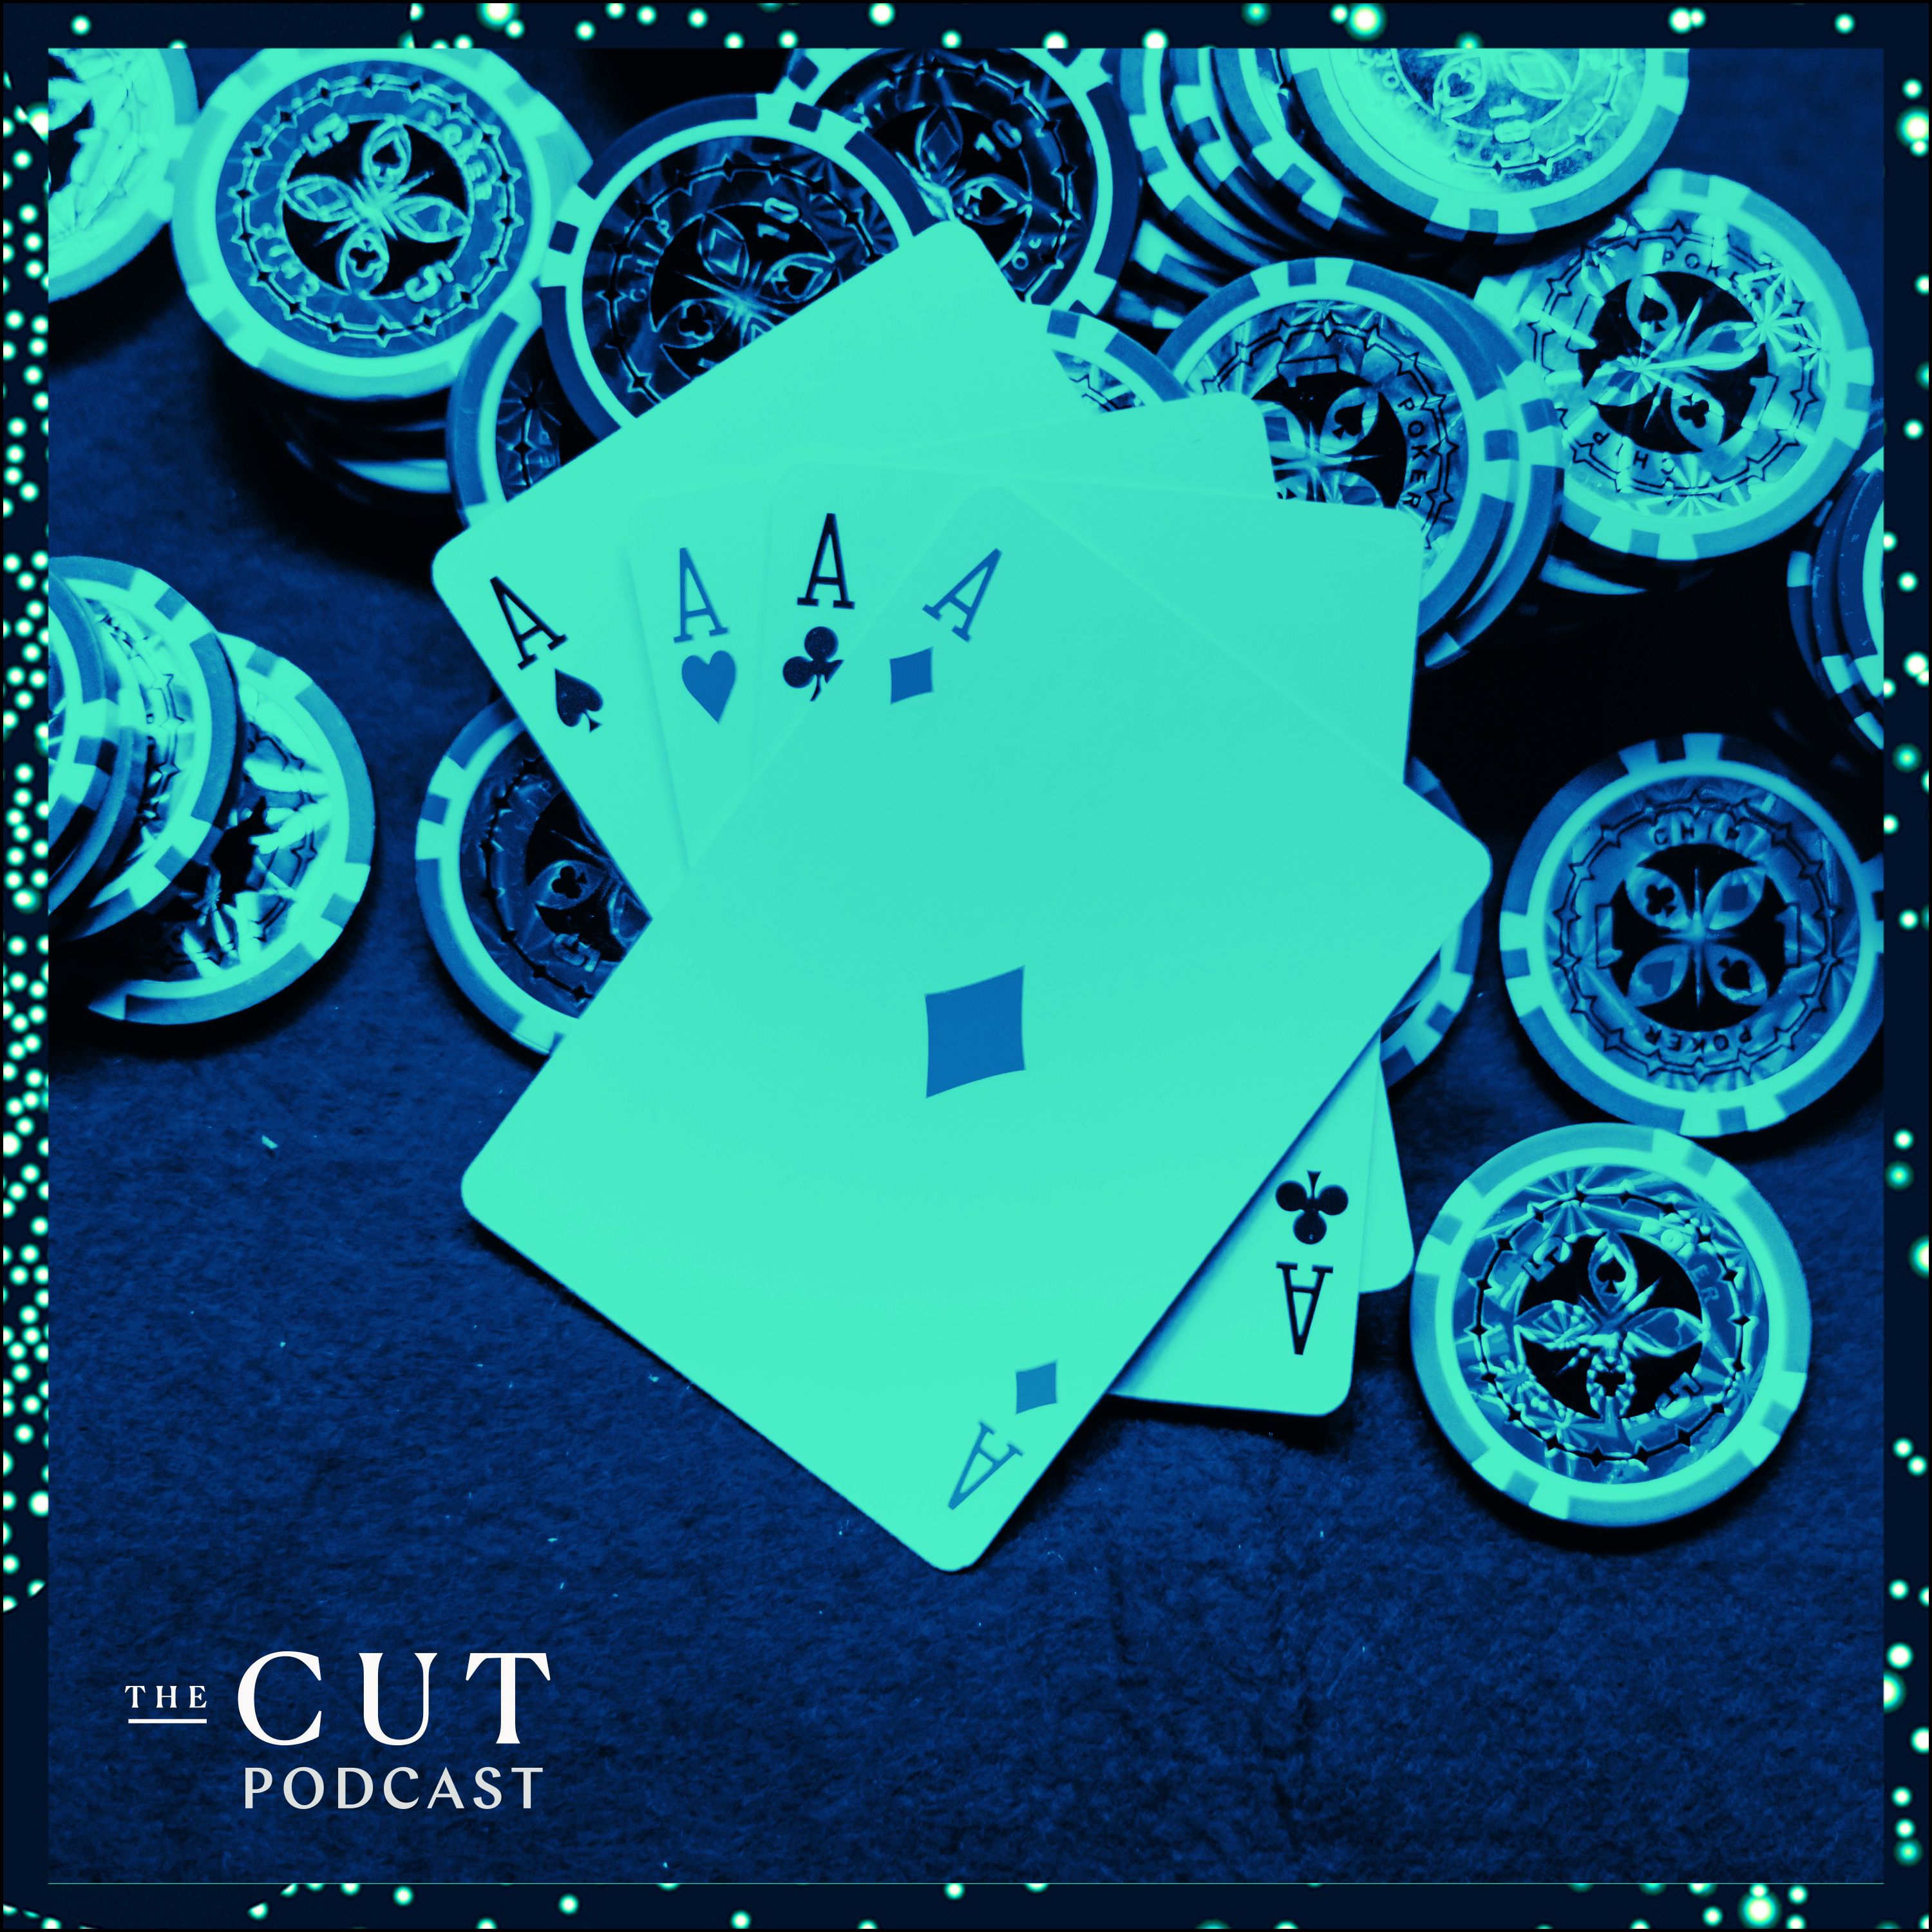 The Cut Podcast Can Poker Help You Win at Life?